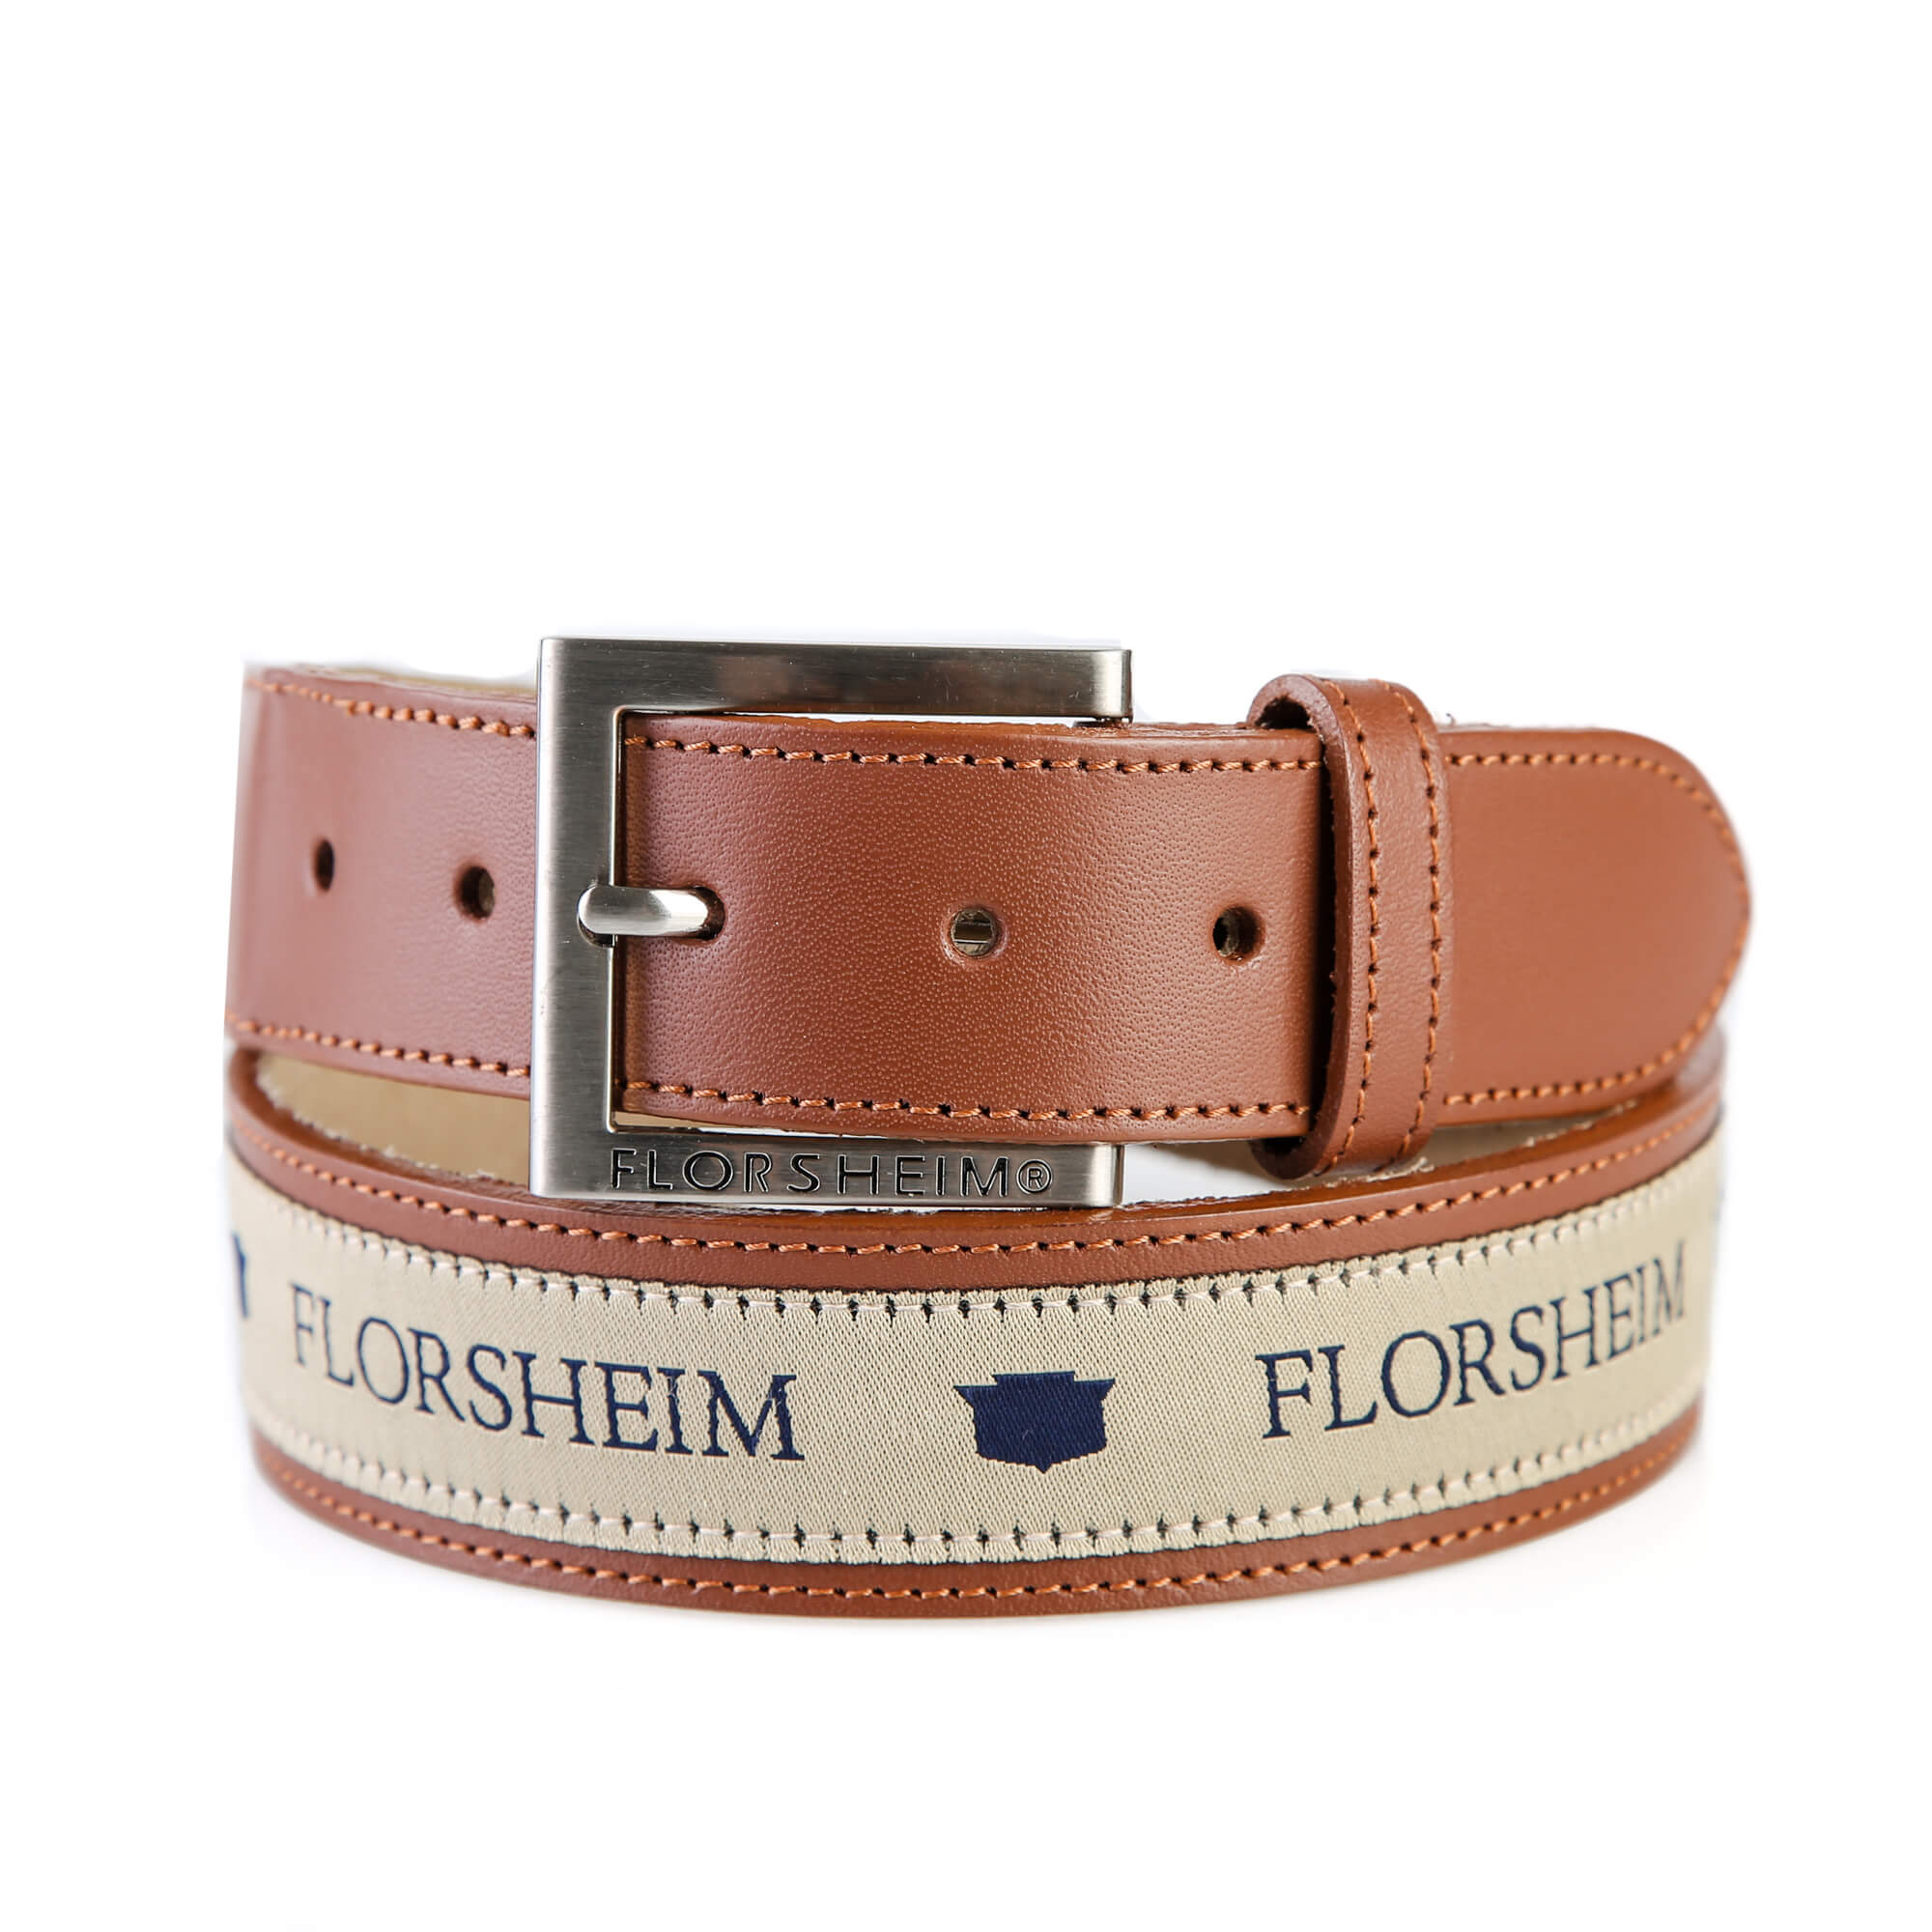 FLORSHEIM BELT EMBROIDERED in Tan for R499.00